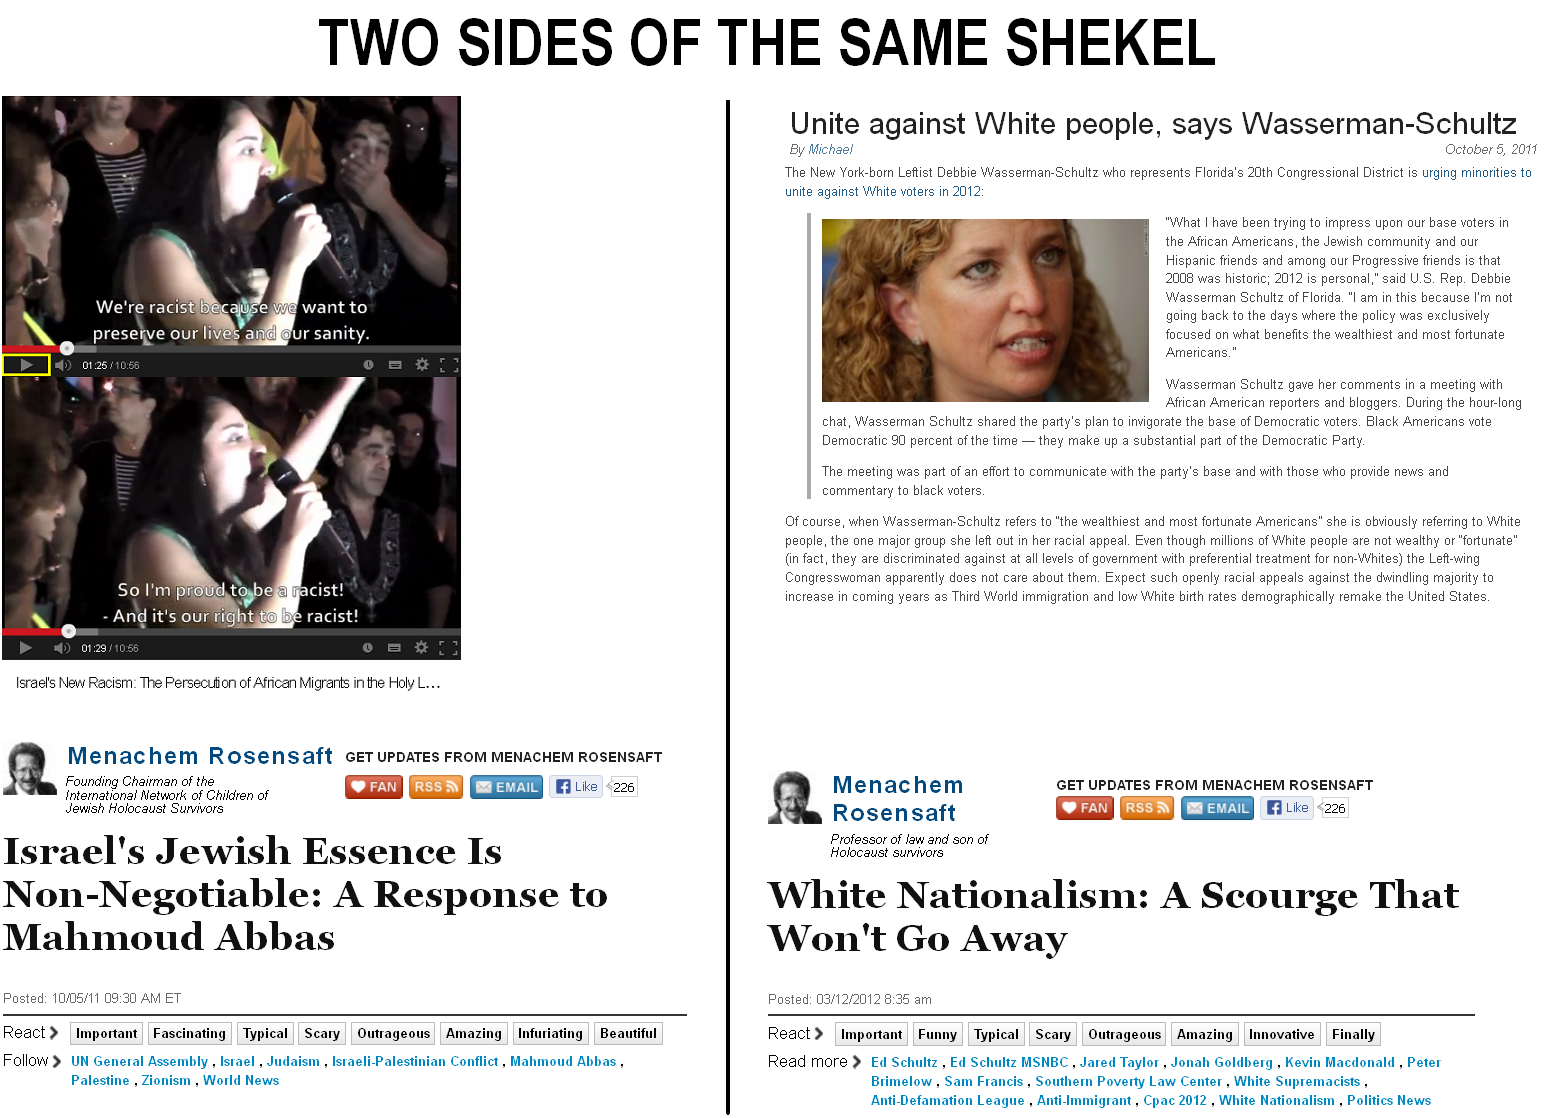 Two sides of the same shekel. , what's more to say ?. TWC) SIDES OF THE SAME SHEKEL So togae And it' s our right he = racist! NEH : TN, halfrican Migrants in th